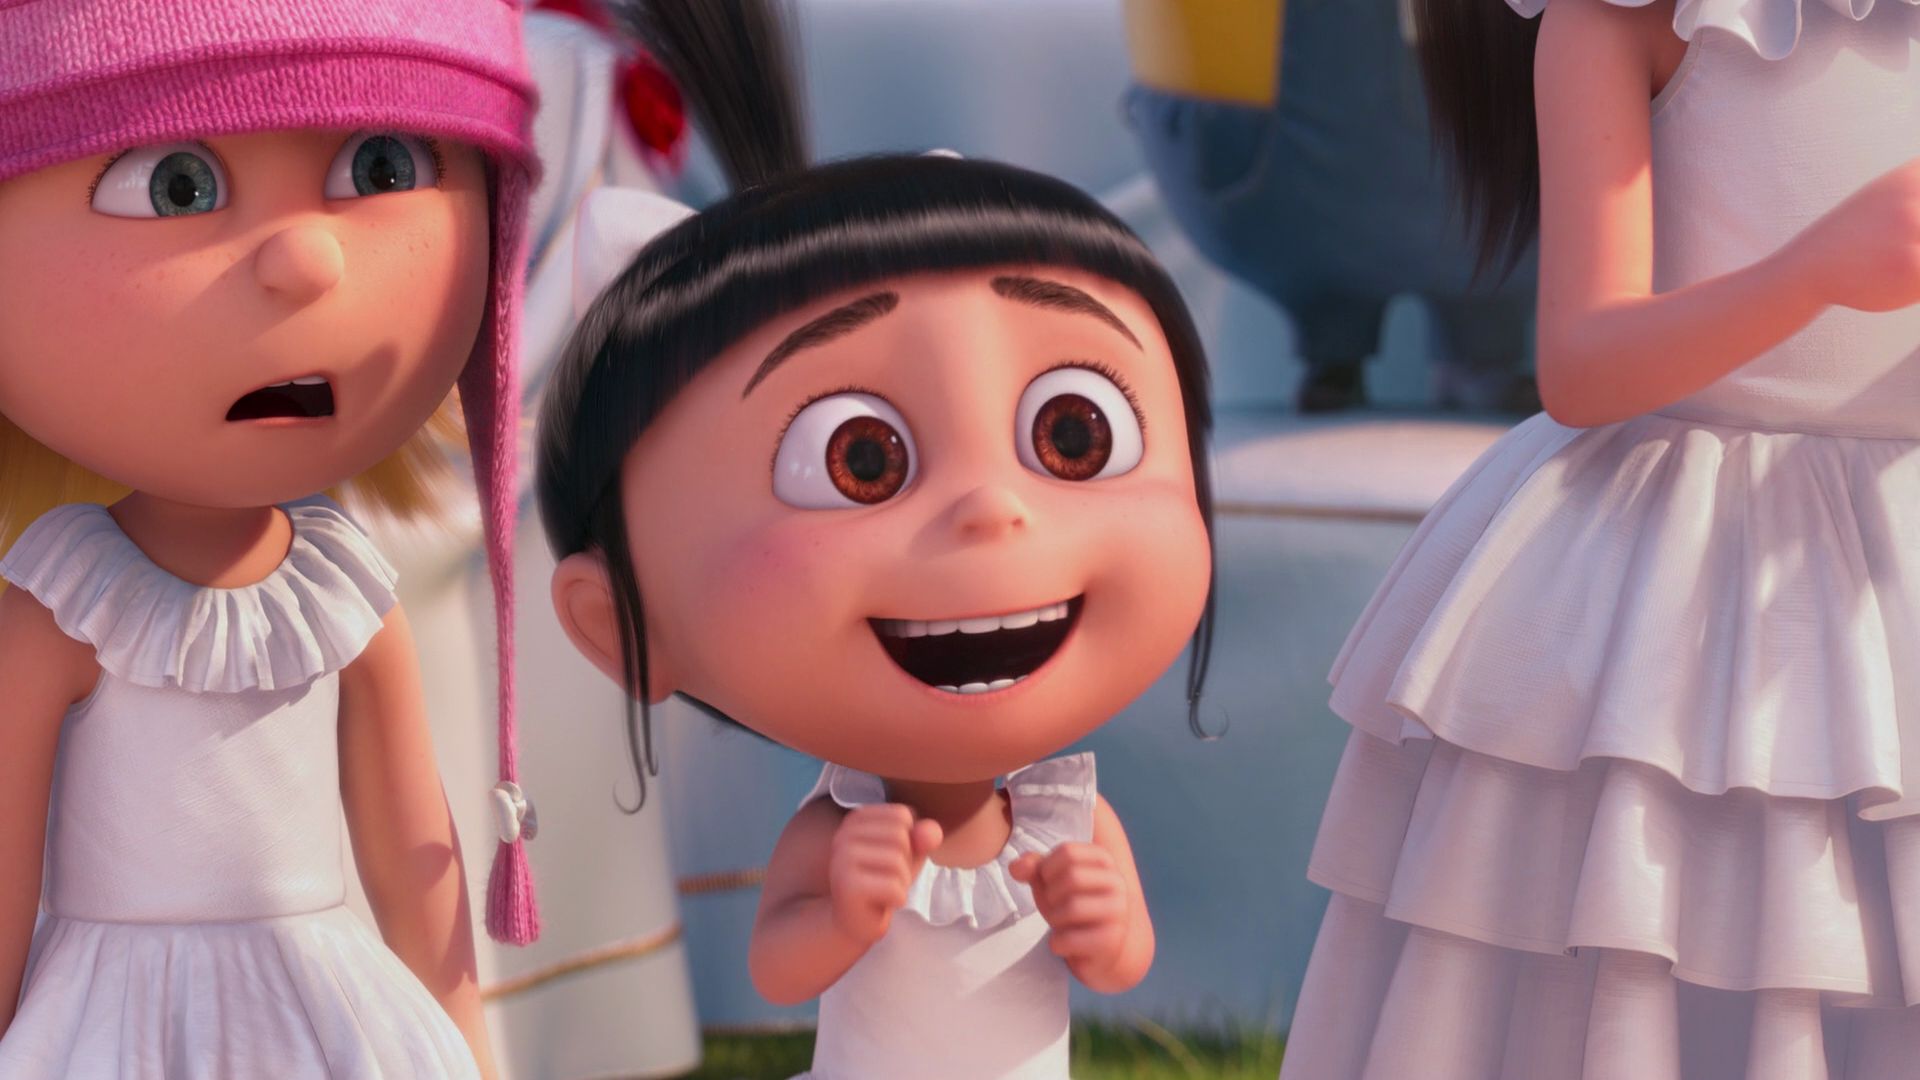 Phone Background Full HD despicable me 2, movie, agnes (despicable me), edith (despicable me)